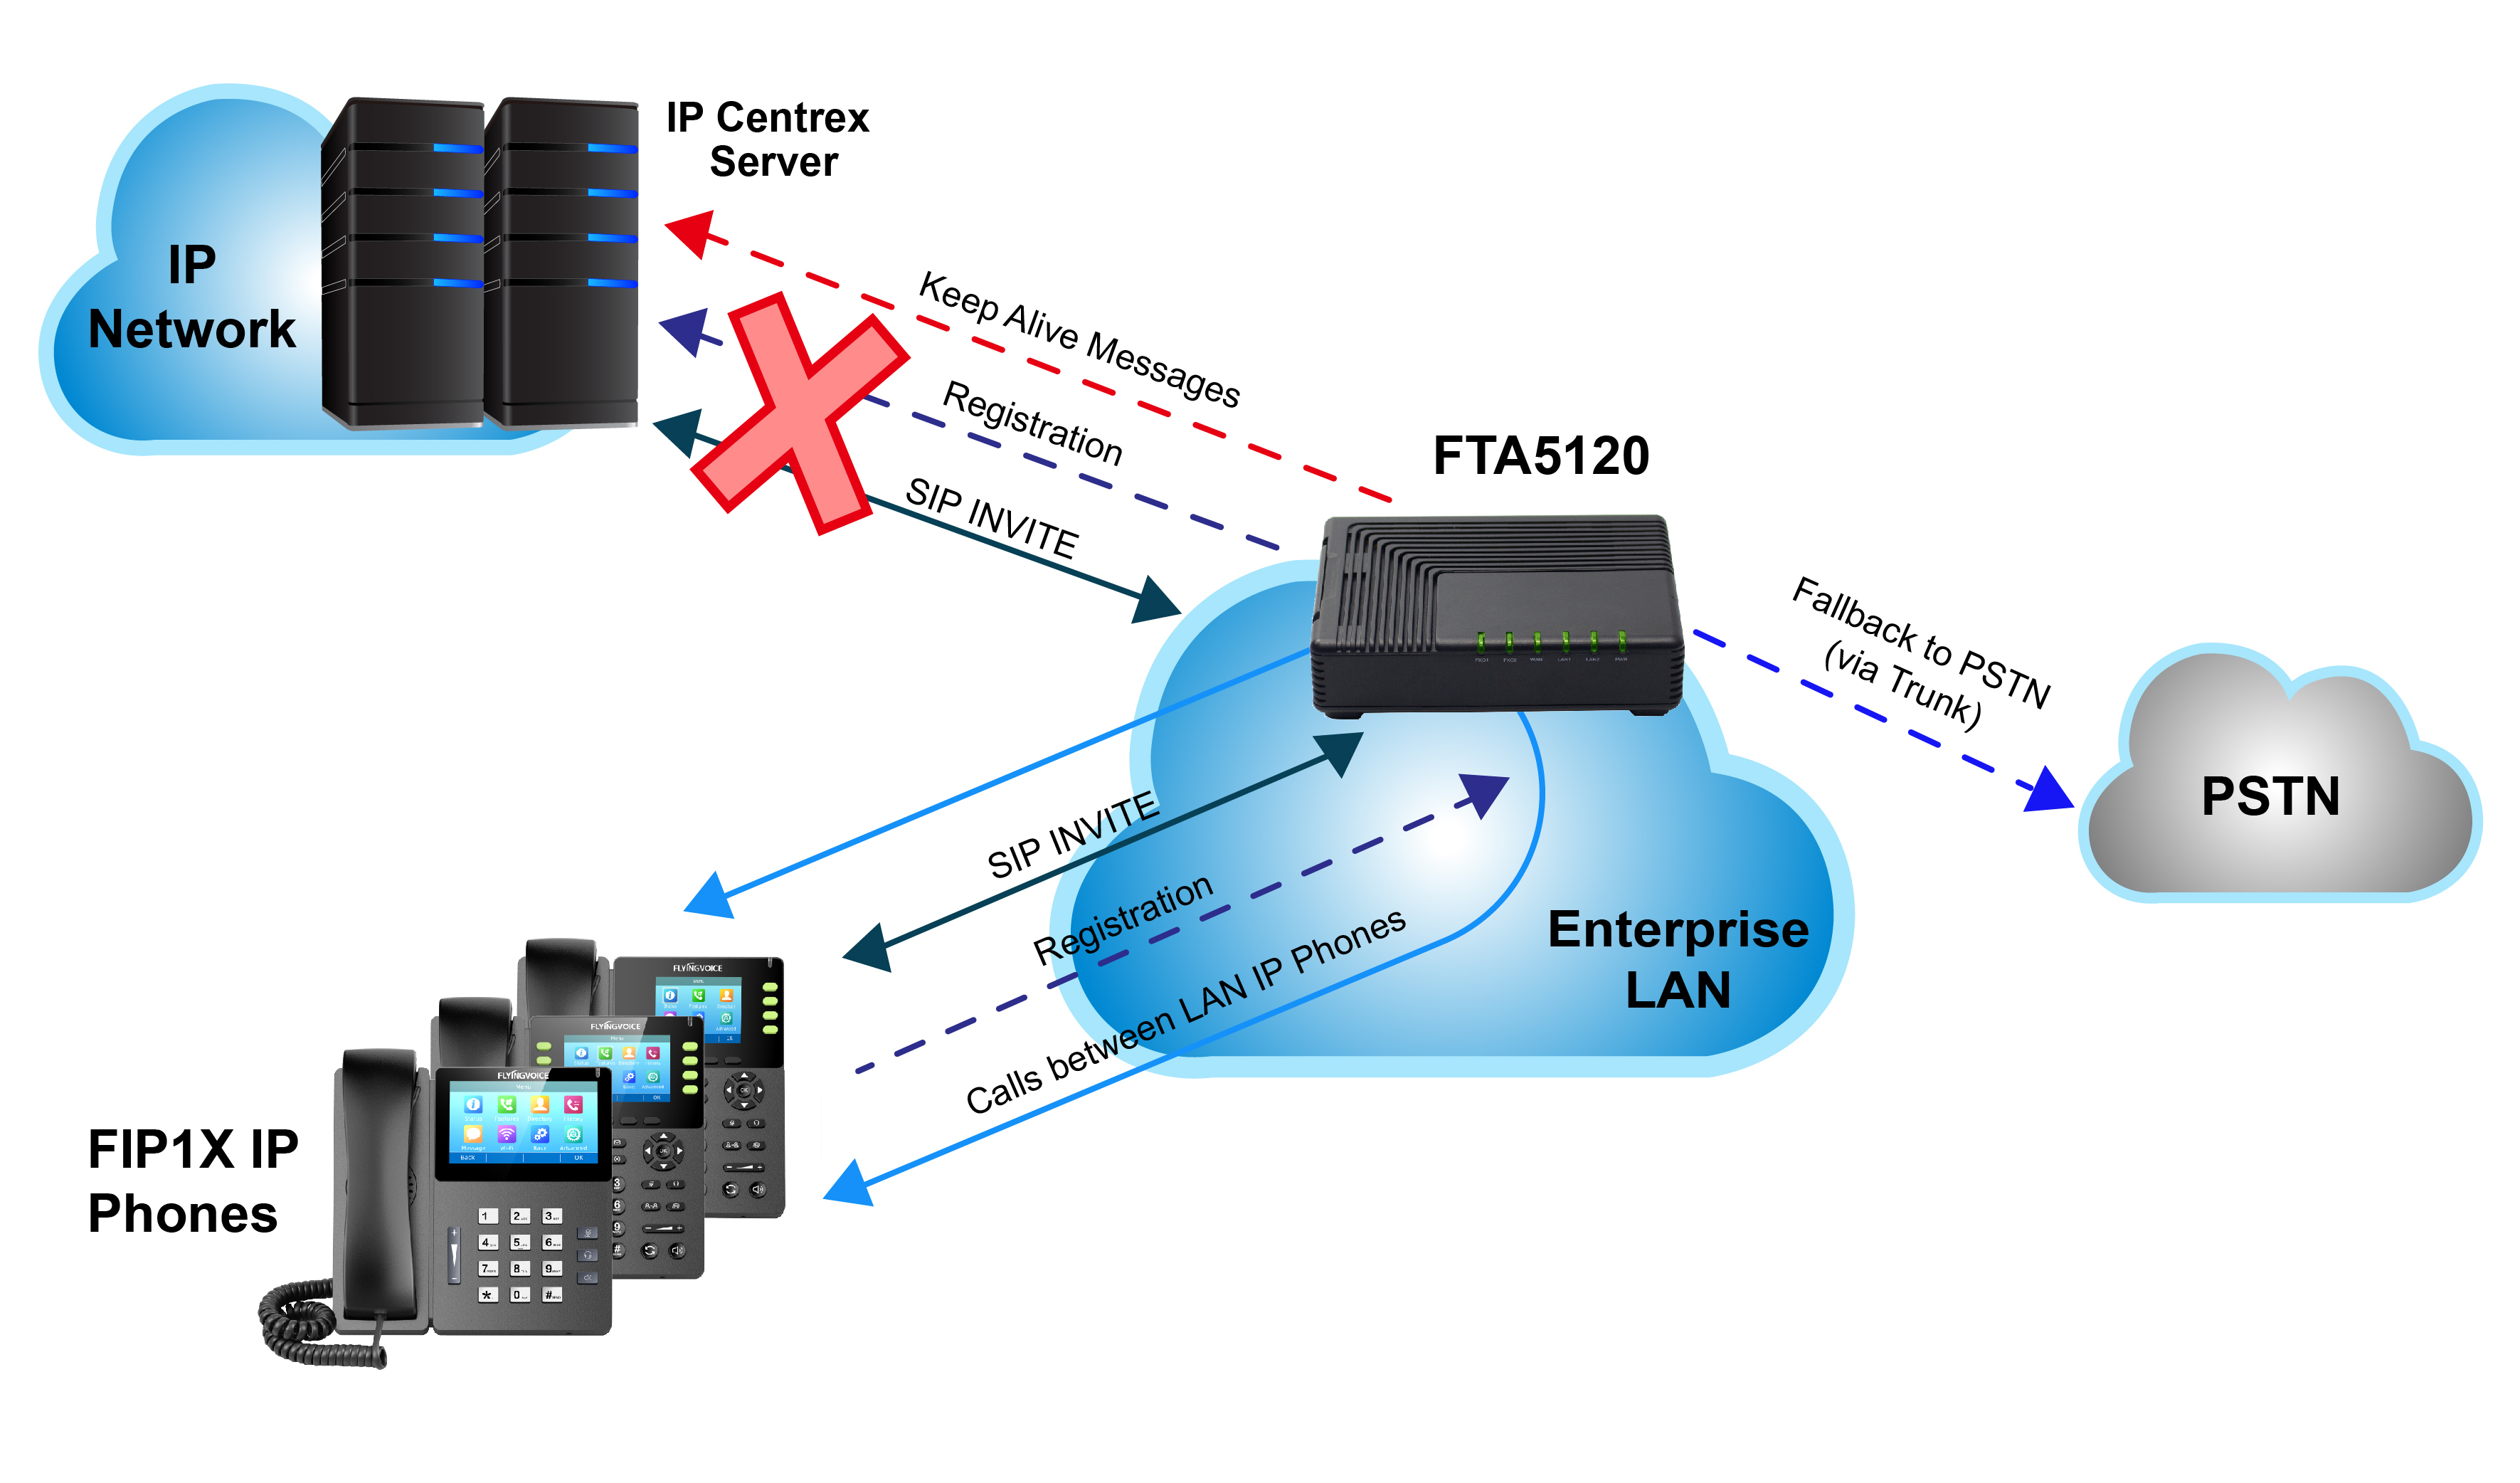 Emergency State: When a connection with the external proxy fails, the FTA5120 enters the SAS emergency state. The FTA5120 serves as a proxy for the IP Phones, by handling internal call routing of the IP Phones (within the LAN enterprise).